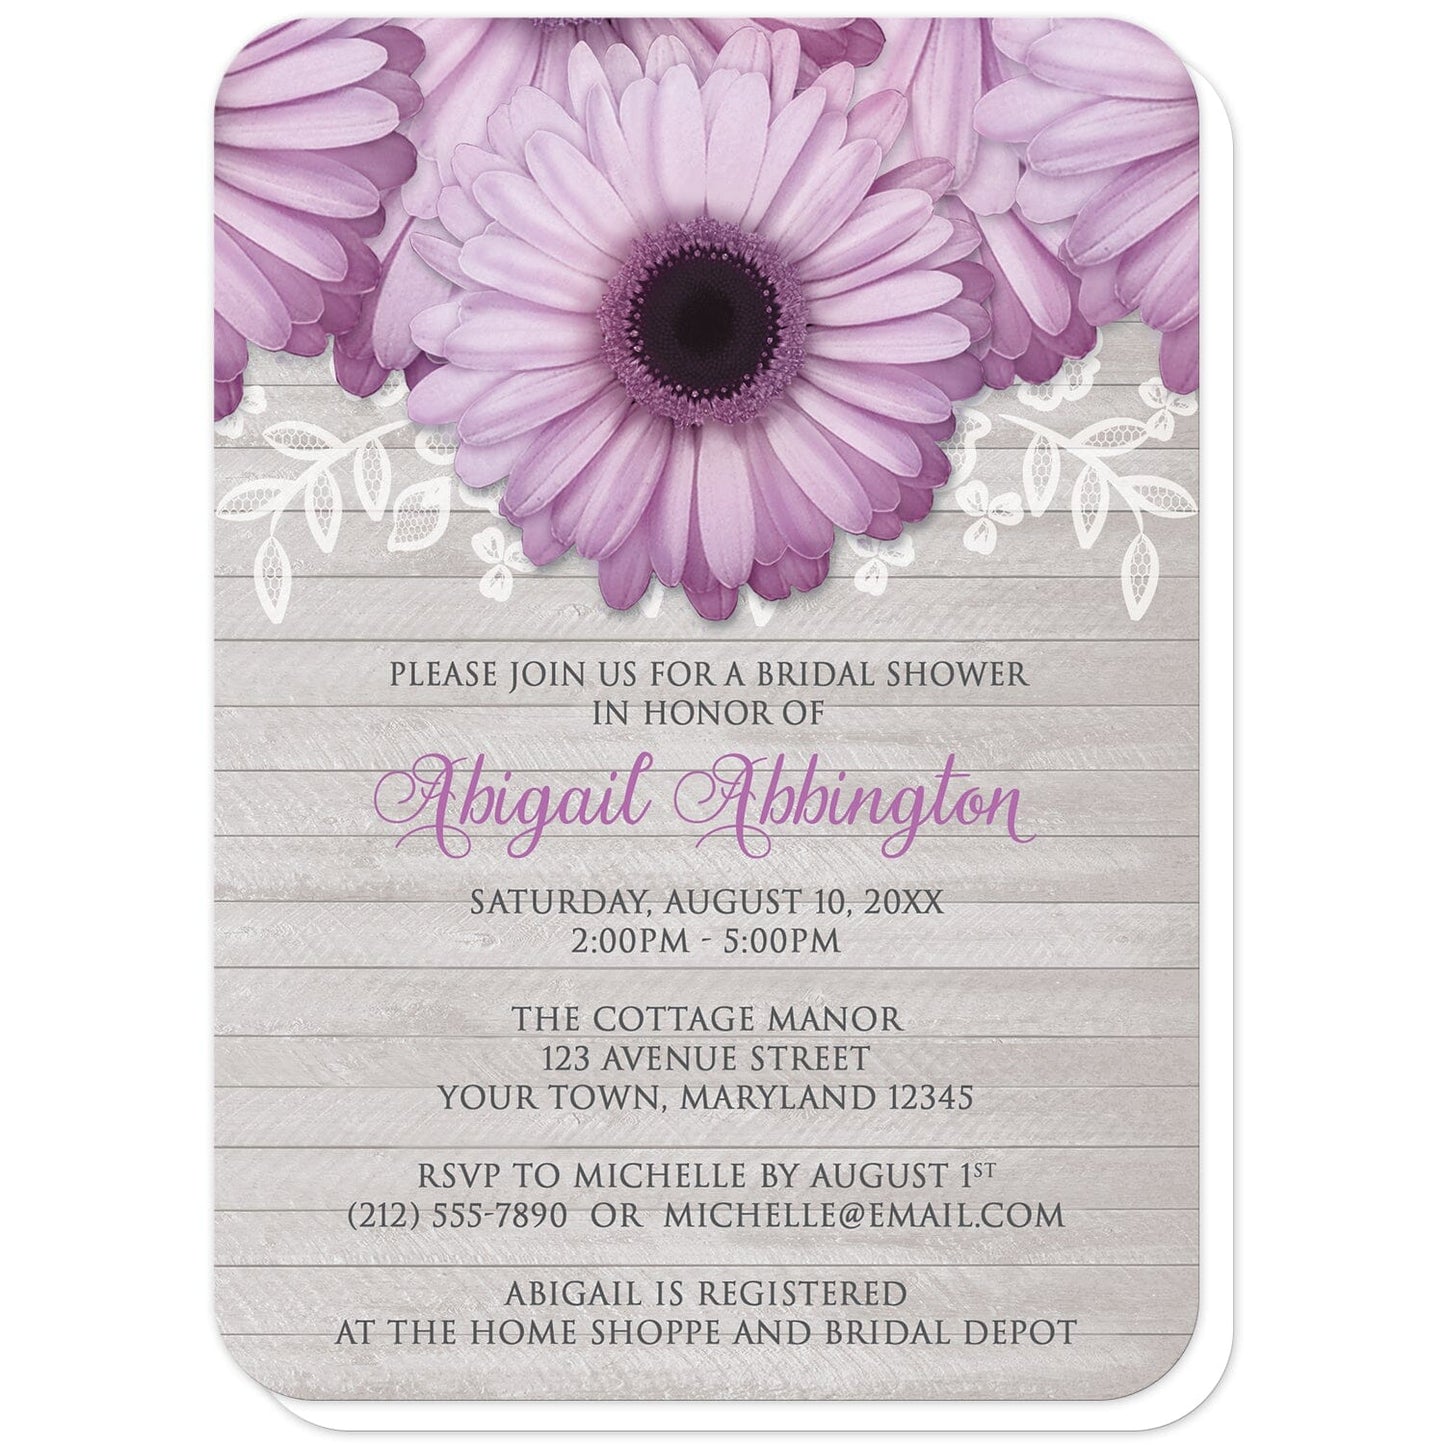 Rustic Purple Daisy Gray Wood Bridal Shower Invitations (with rounded corners) at Artistically Invited. Rustic purple daisy gray wood bridal shower invitations designed with large and lovely purple daisy flowers with a white lace overlay along the top over a light gray wood background illustration. Your personalized bridal shower celebration details are custom printed in purple and dark gray over the wood background design below the pretty purple daisies.